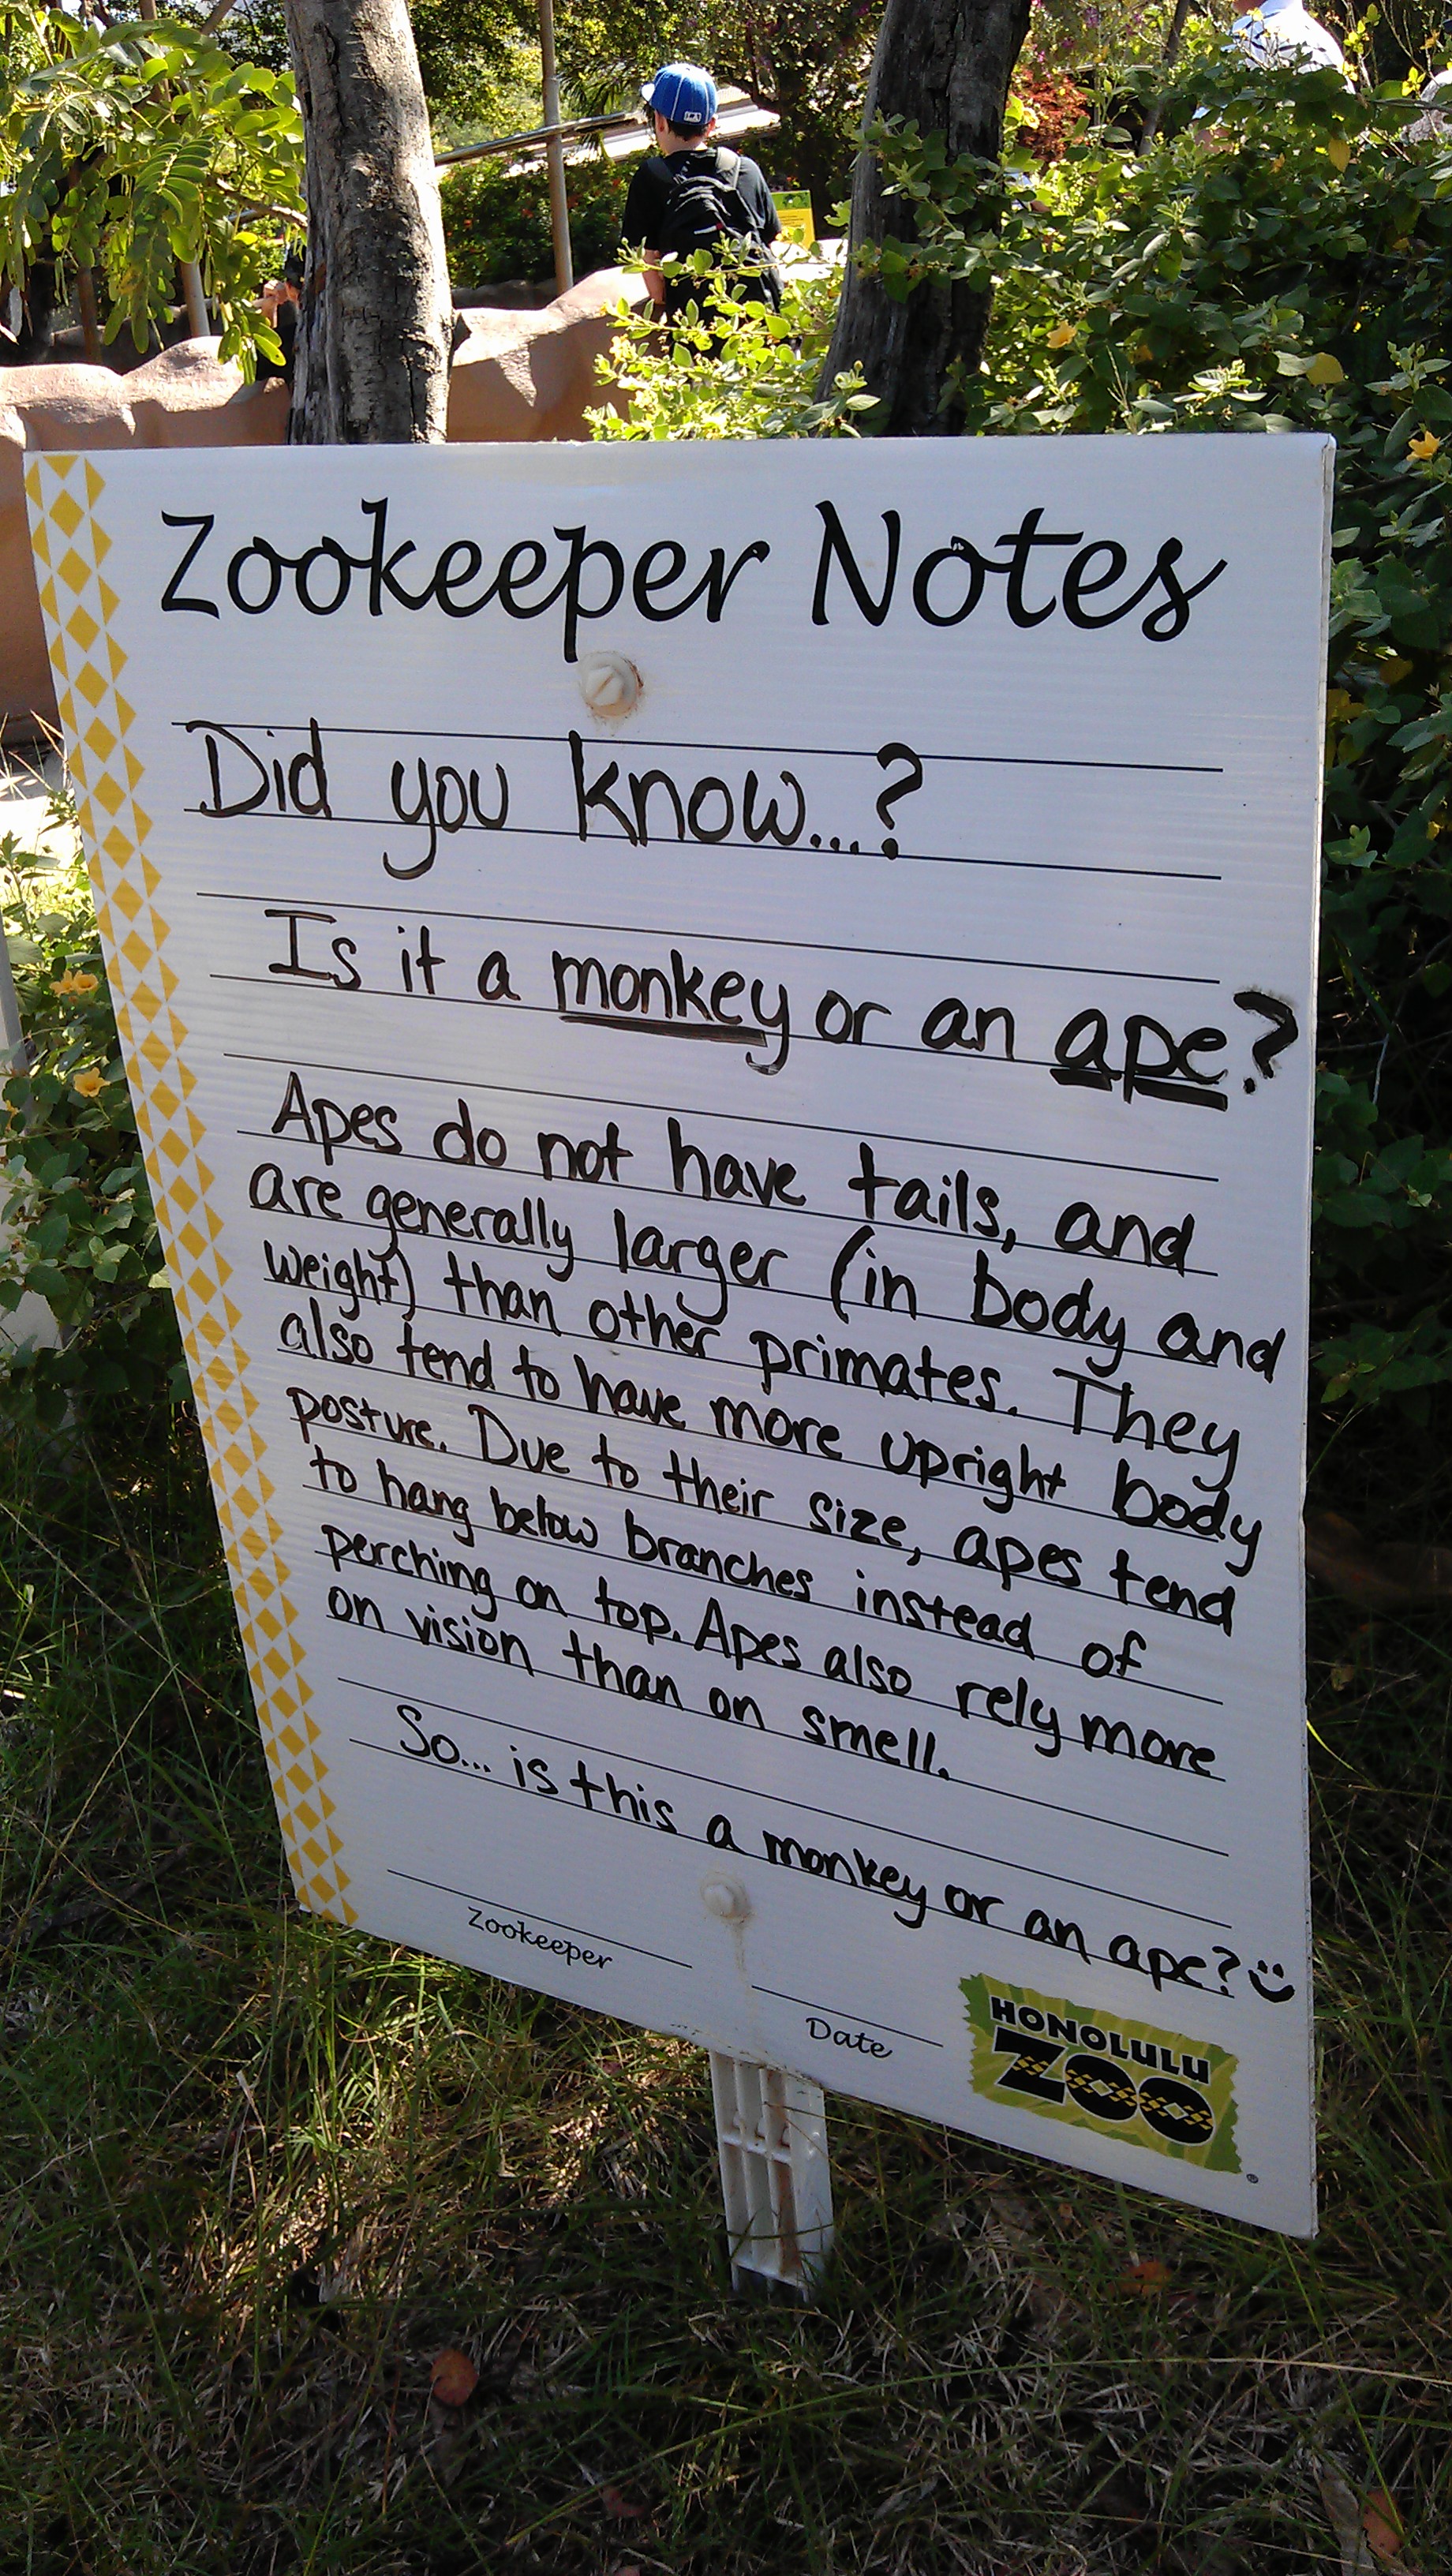 1/24/2012 Zookeeper Notes: Monkey or Ape?